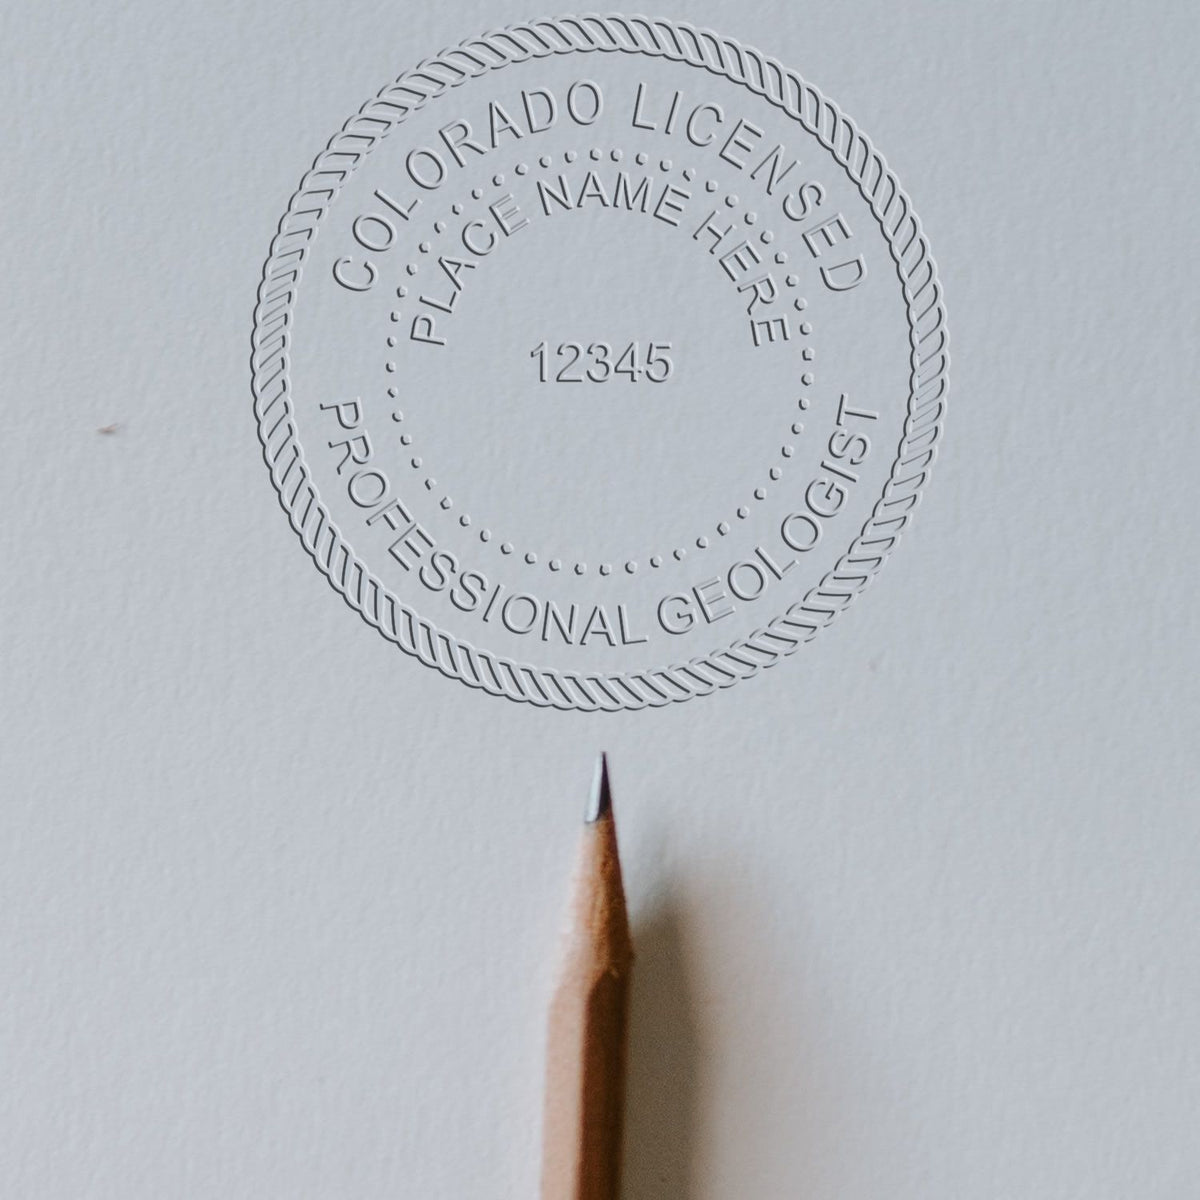 An alternative view of the Handheld Colorado Professional Geologist Embosser stamped on a sheet of paper showing the image in use